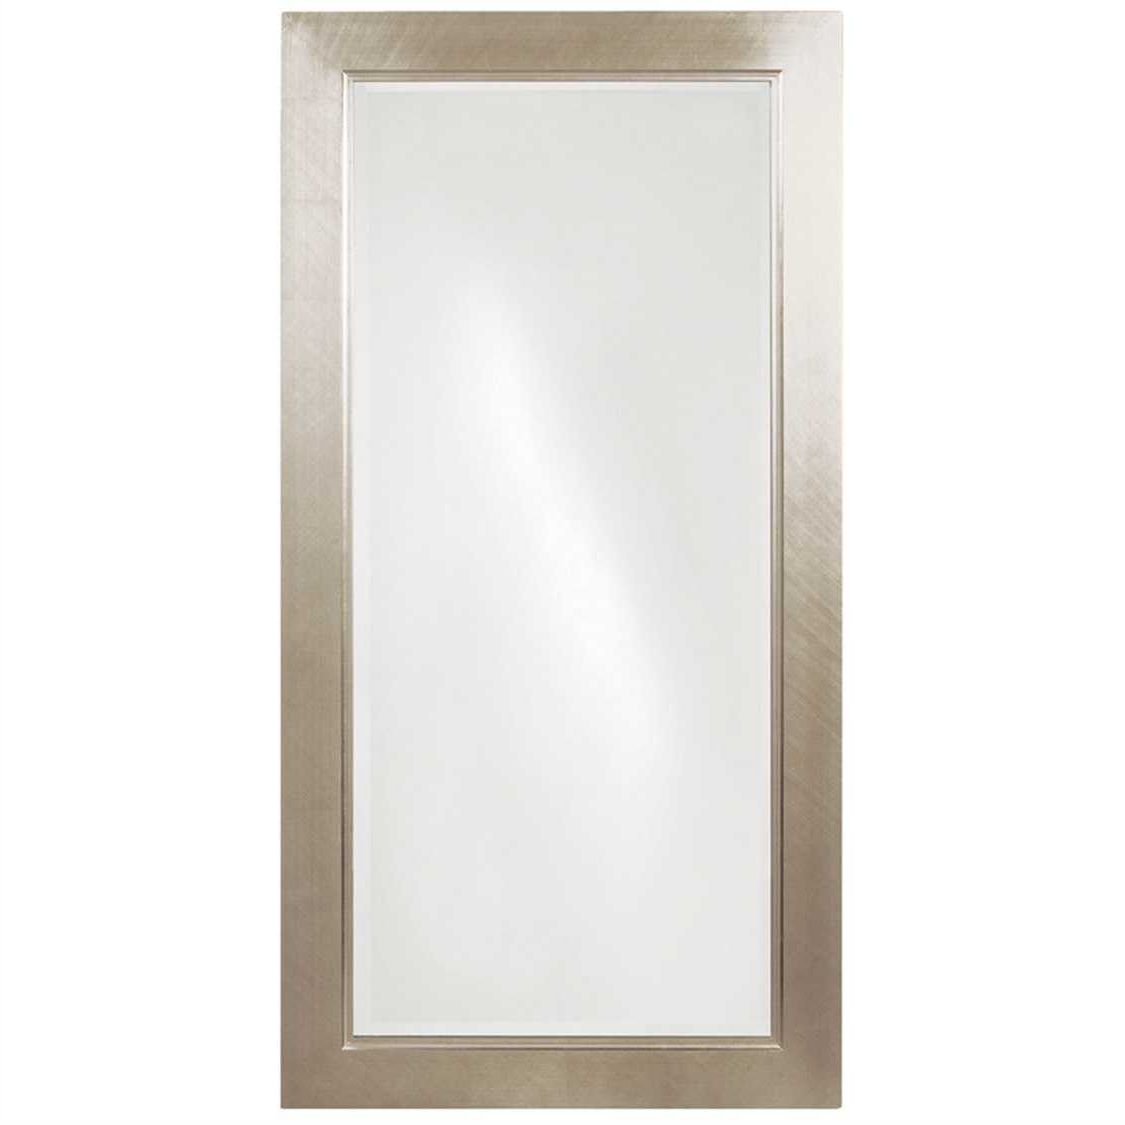 Howard Elliott Millennium 30 X 60 Silver Leaf Wall Mirror With Regard To Most Recently Released Silver Leaf Wall Mirrors (View 18 of 20)